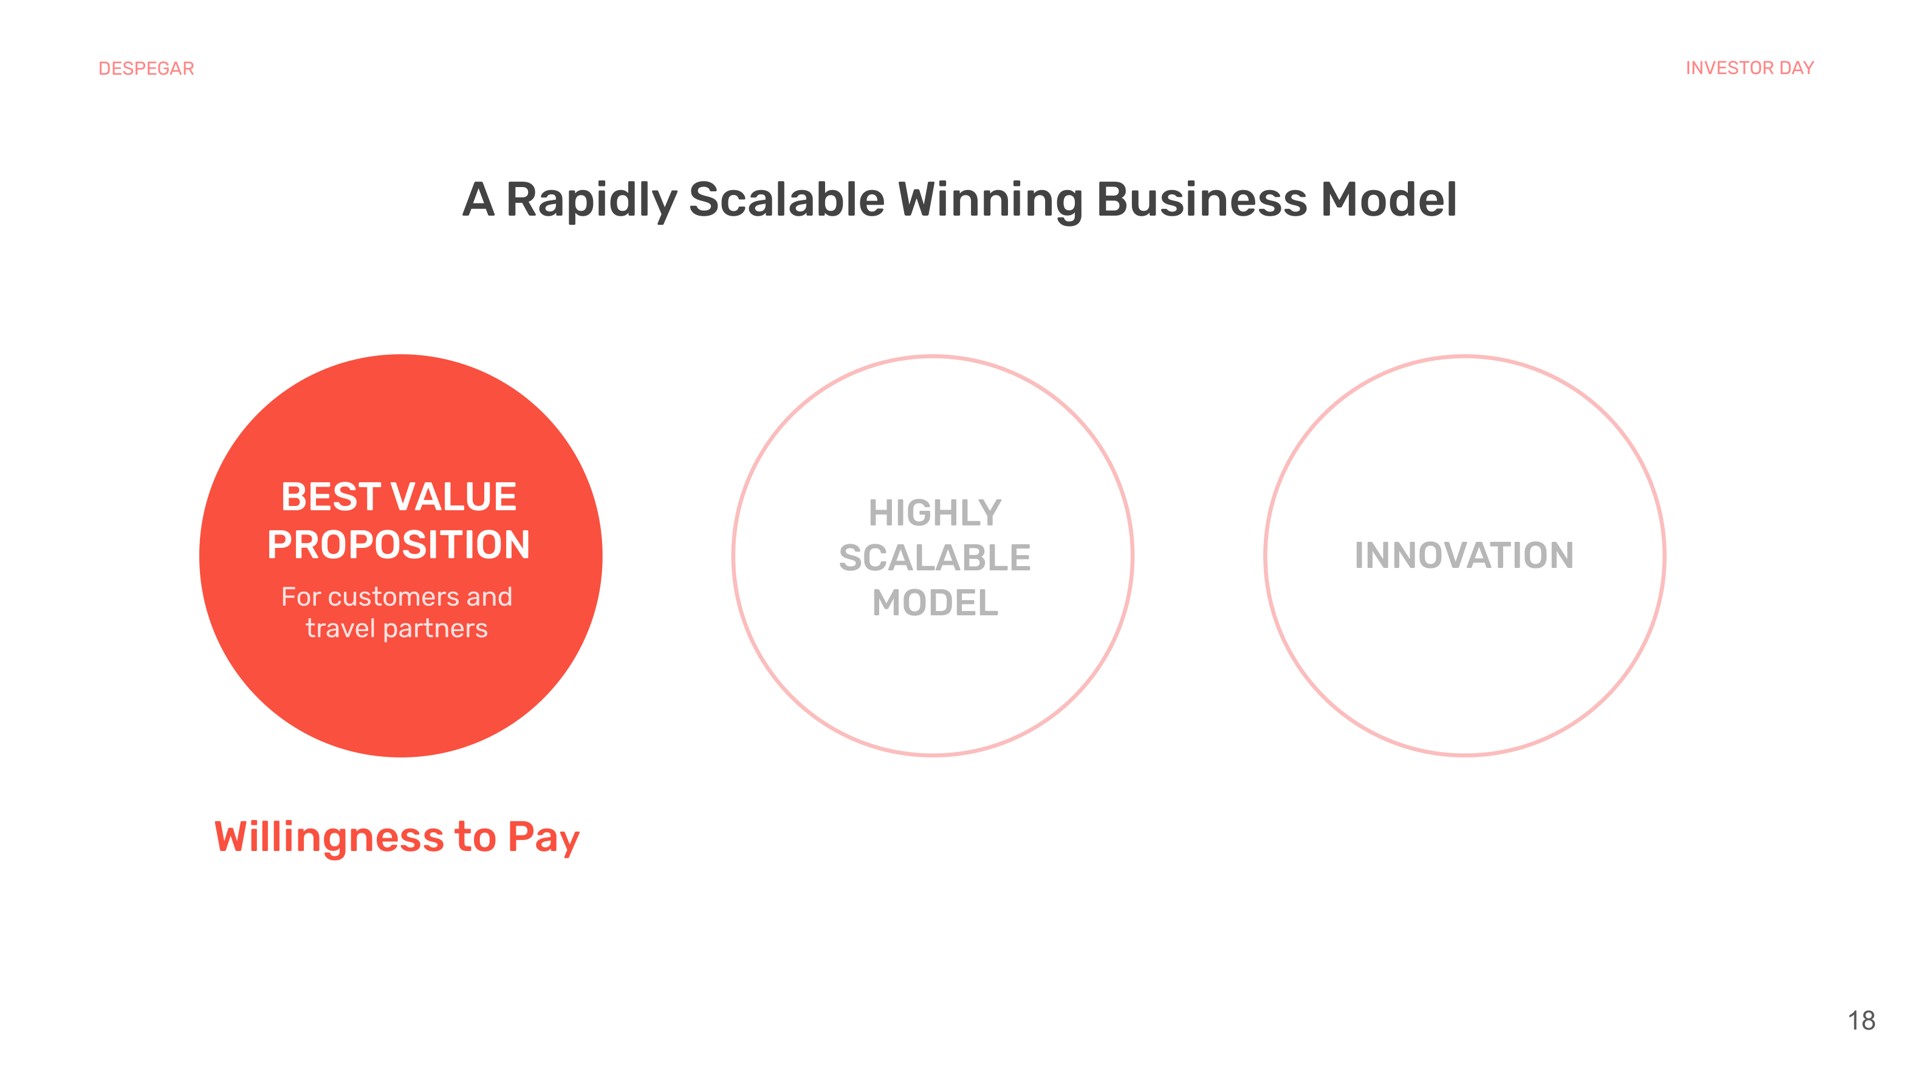 a rapidly scalable winning business model best value proposition for customers and travel partners highly scalable model innovation willingness to pay soy | Despegar